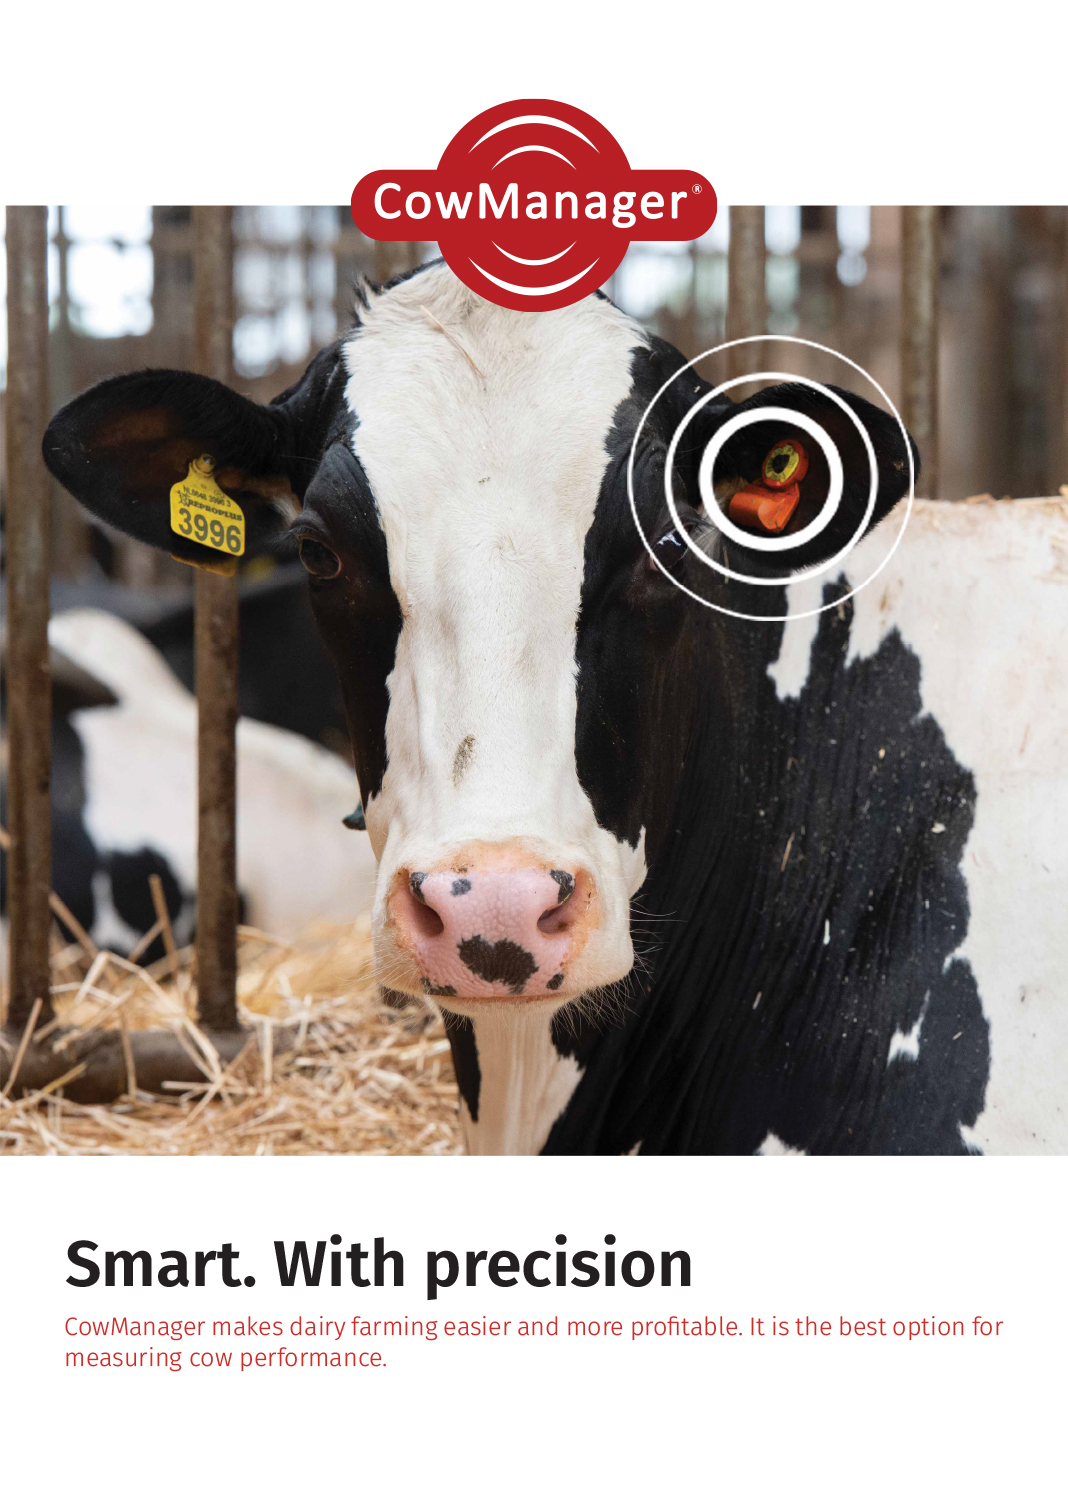 Cow monitoring technology: making dairy farming easier and more profitable